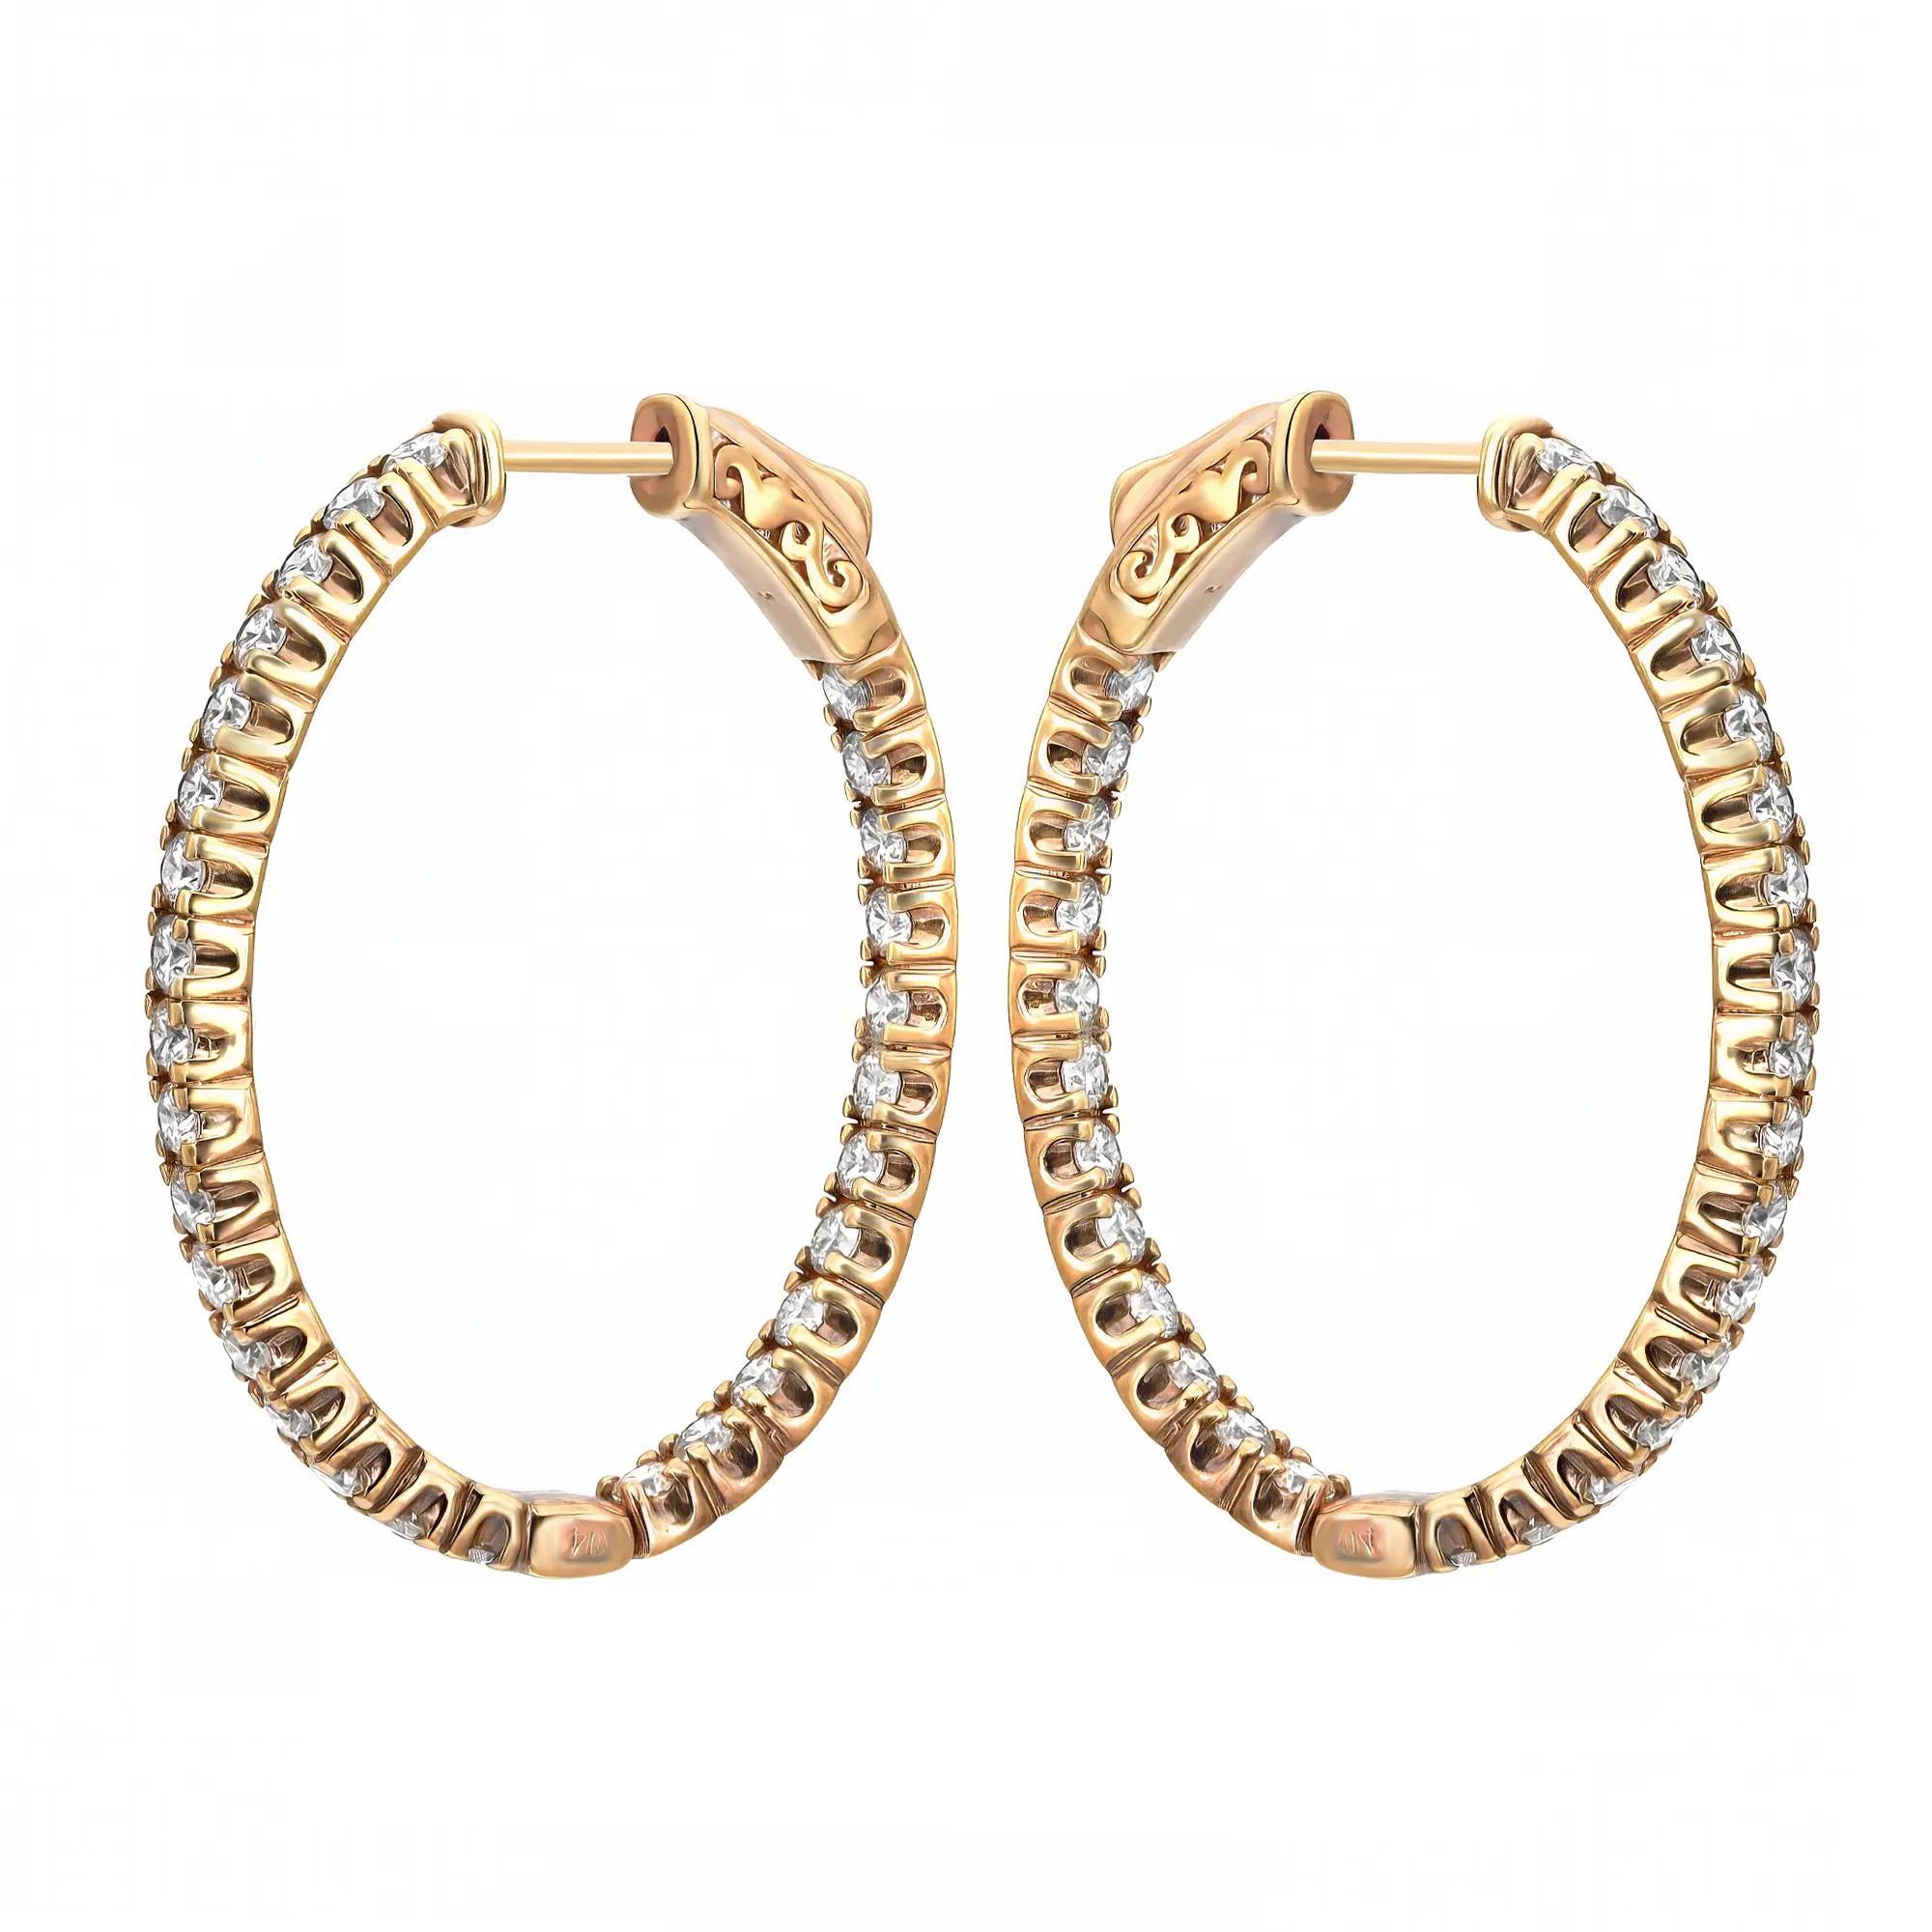 Sparkle all way with these beautiful inside out diamond hoop earrings. Crafted in fine 14K yellow gold. These earrings feature oval shape single line prong set dazzling round brilliant cut diamonds weighing 2.90 carats. The diamonds line half of the